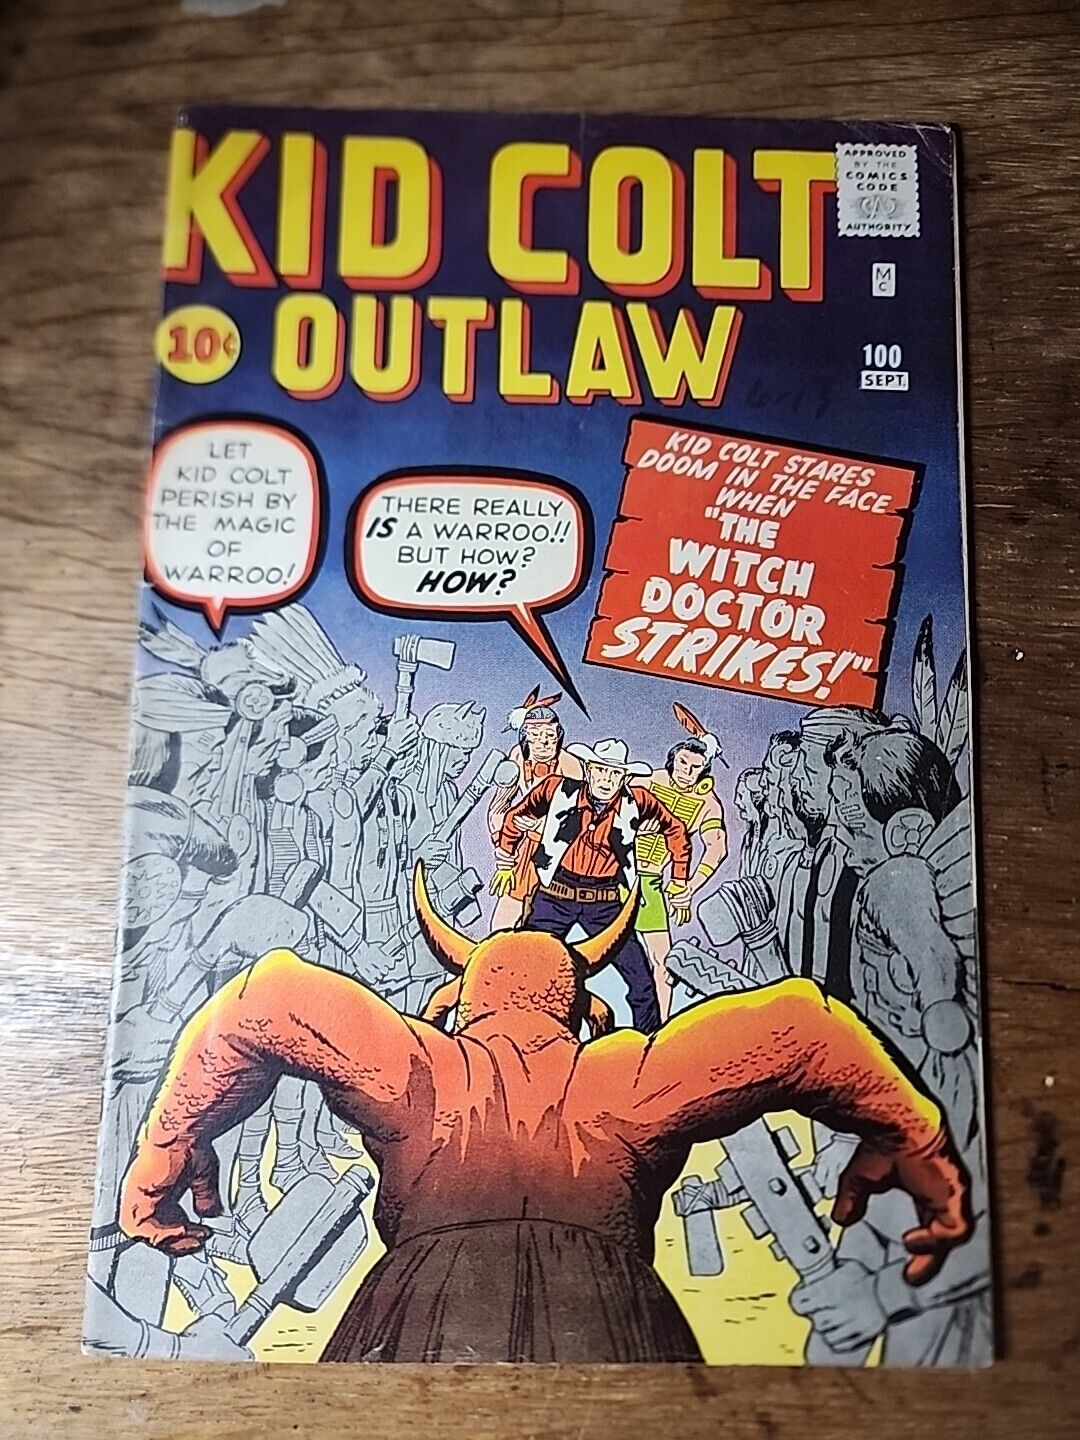 Kid Colt Outlaw Issue 100 Sept. 1961 Kirby Cover Marvel Silver Age Cowboy Comic